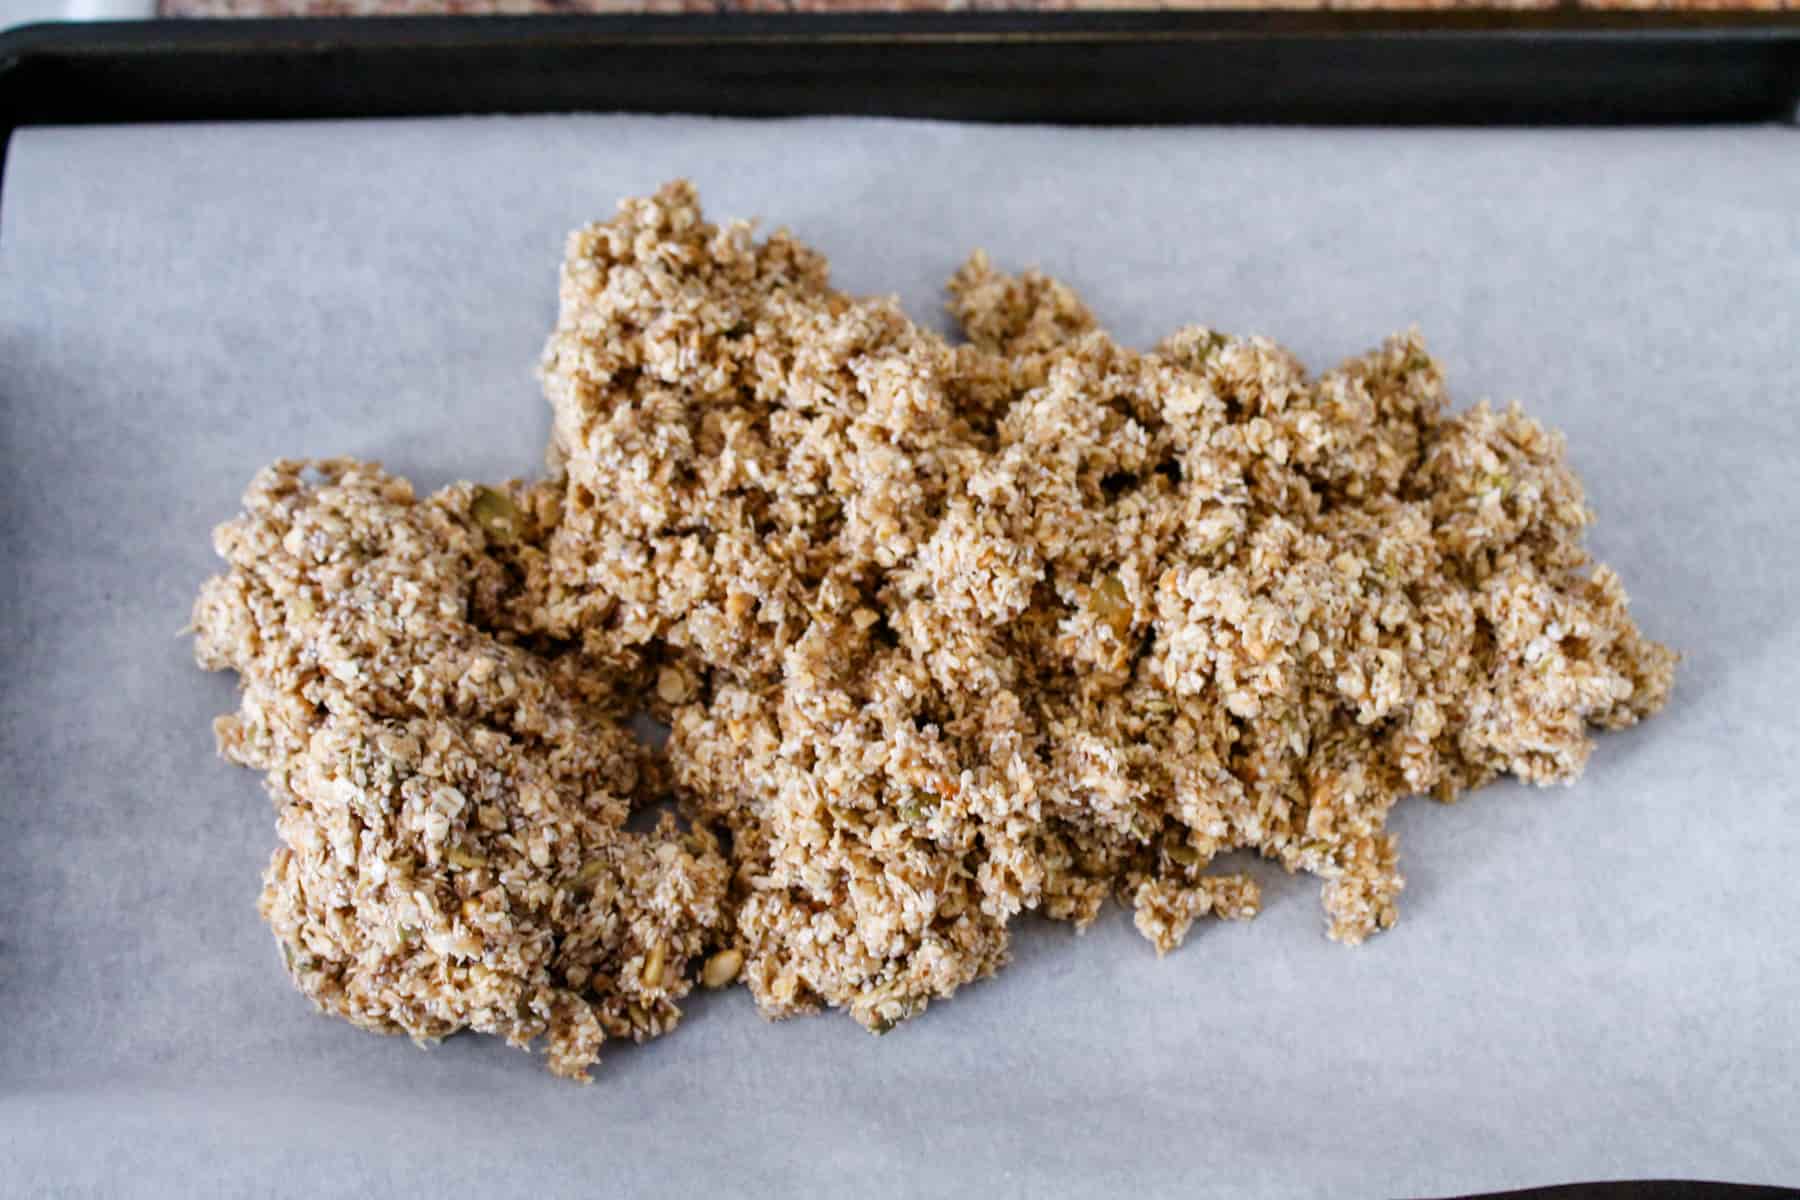 a pile of the oat mixture on a parchment lined baking sheet.